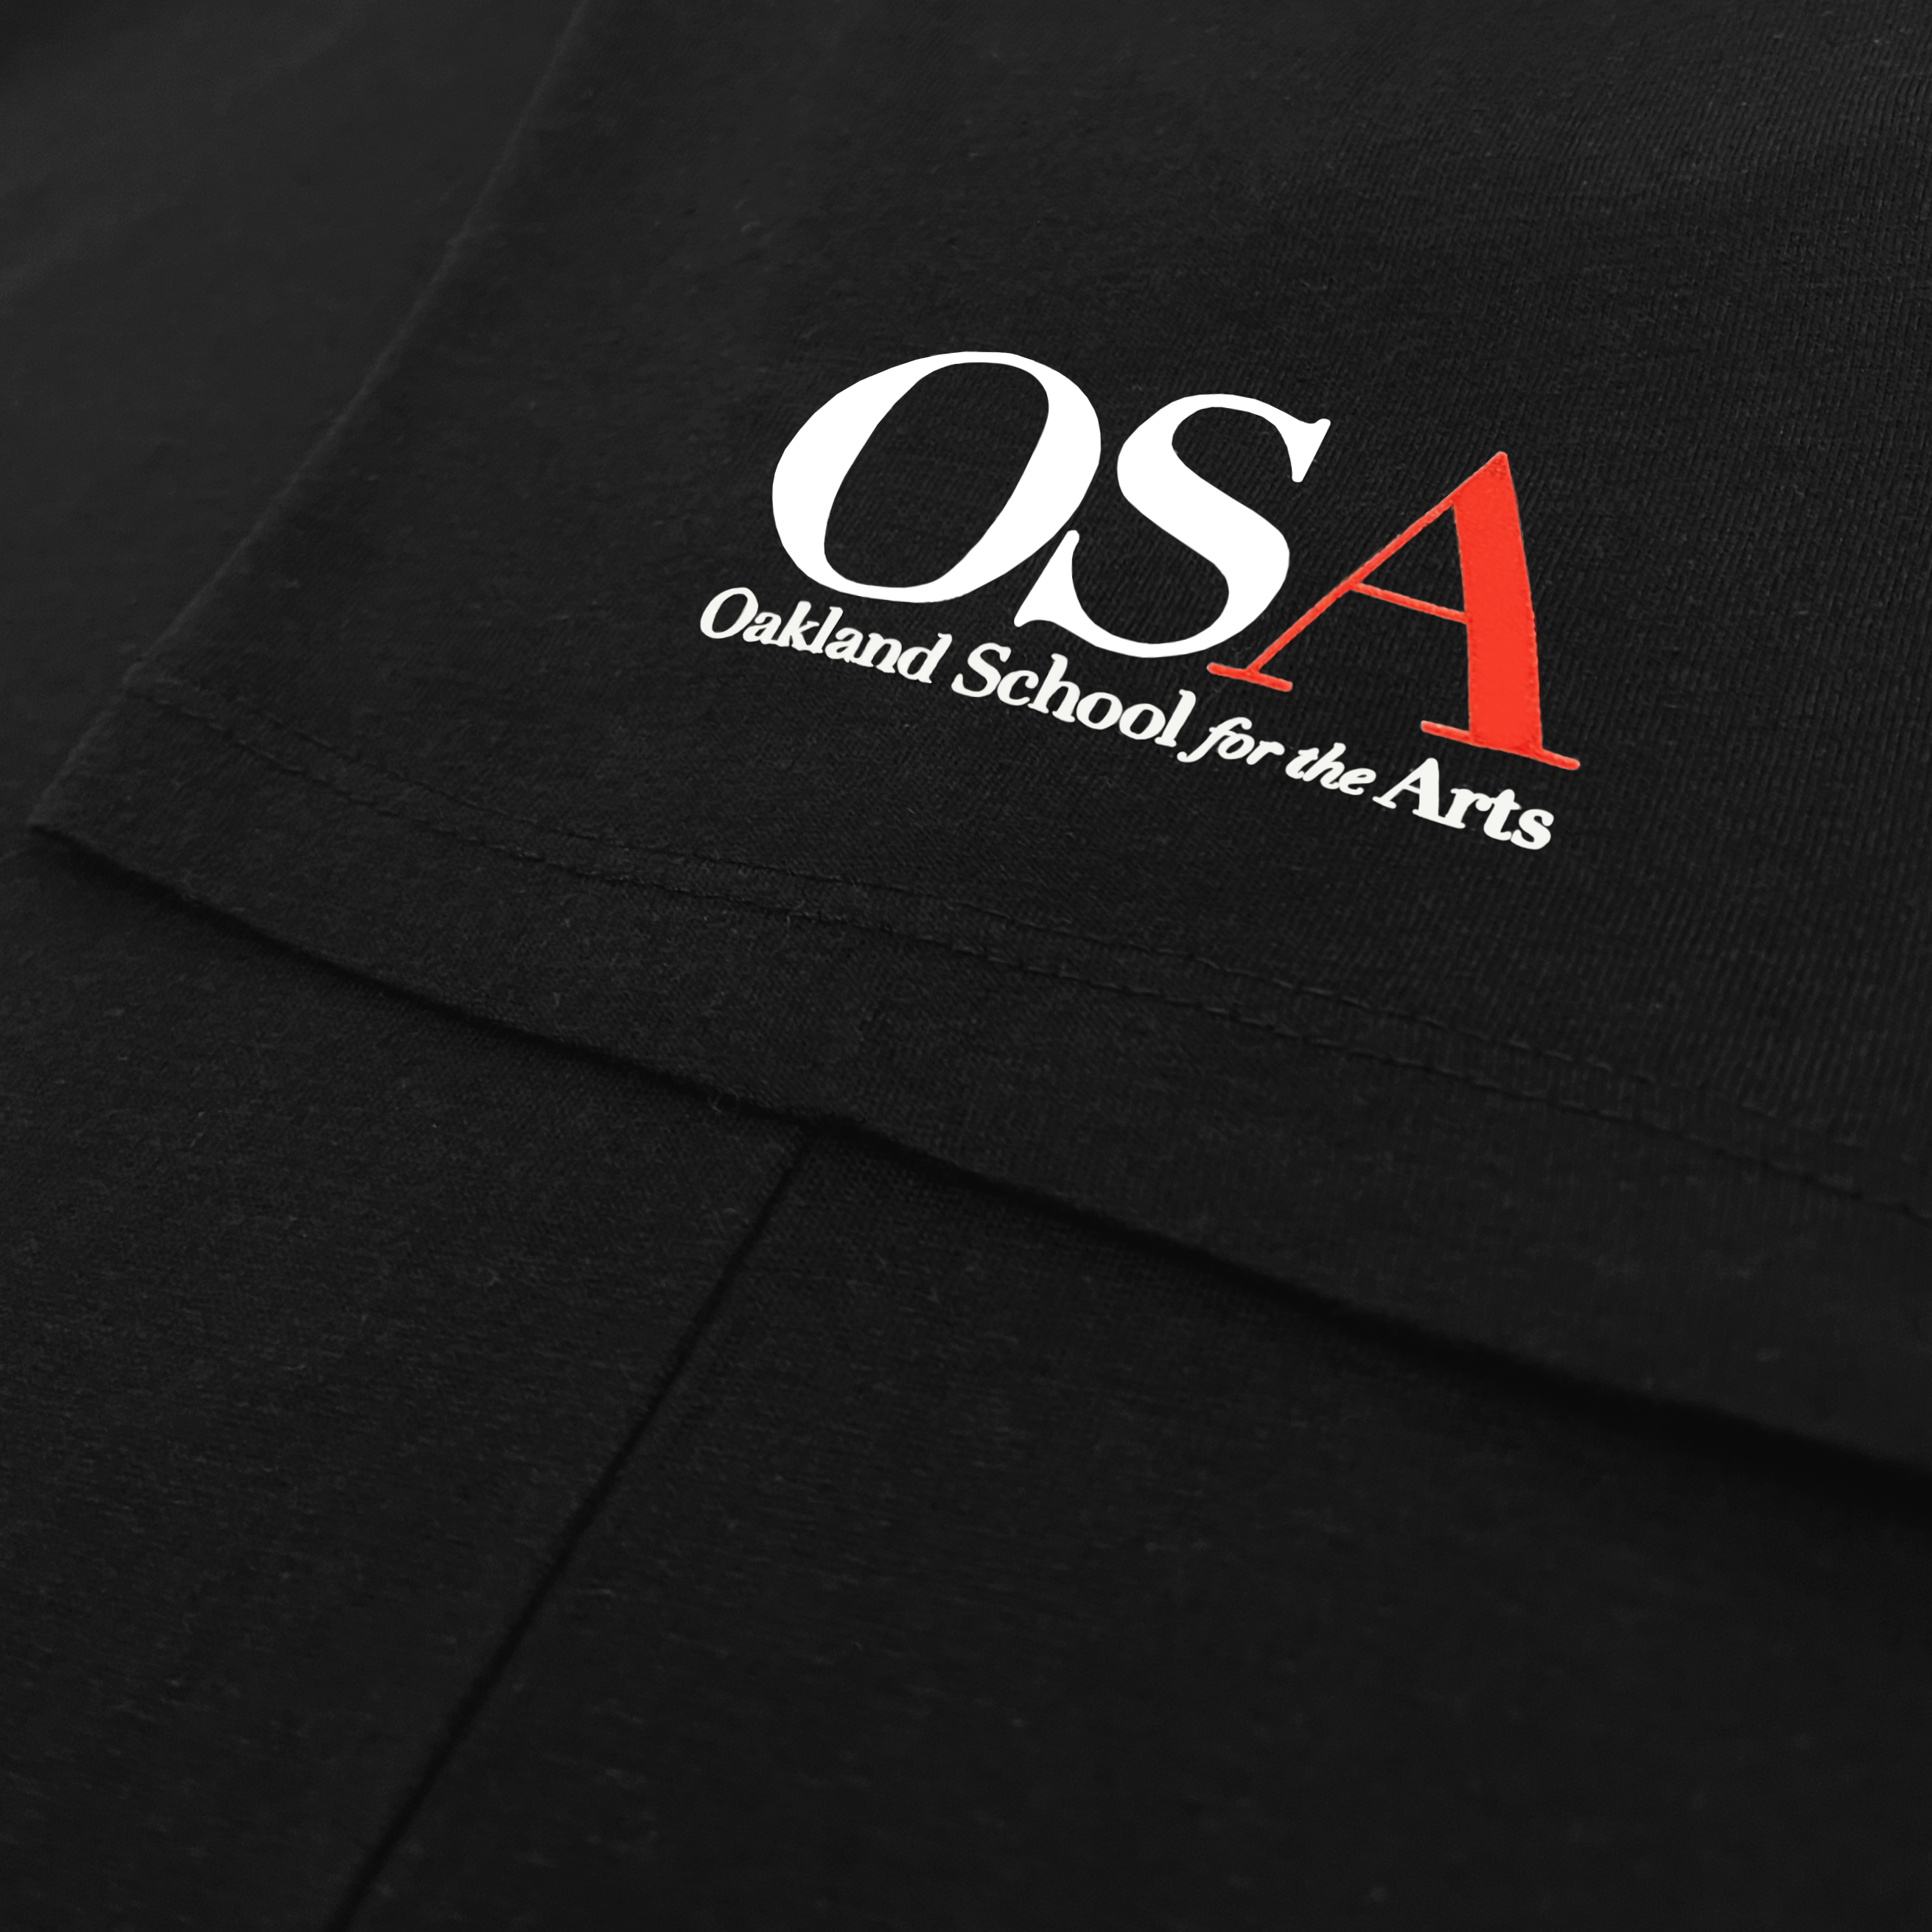 OSA Oakland School of the Arts logo and wordmark on the sleeve a black women's cut t-shirt.